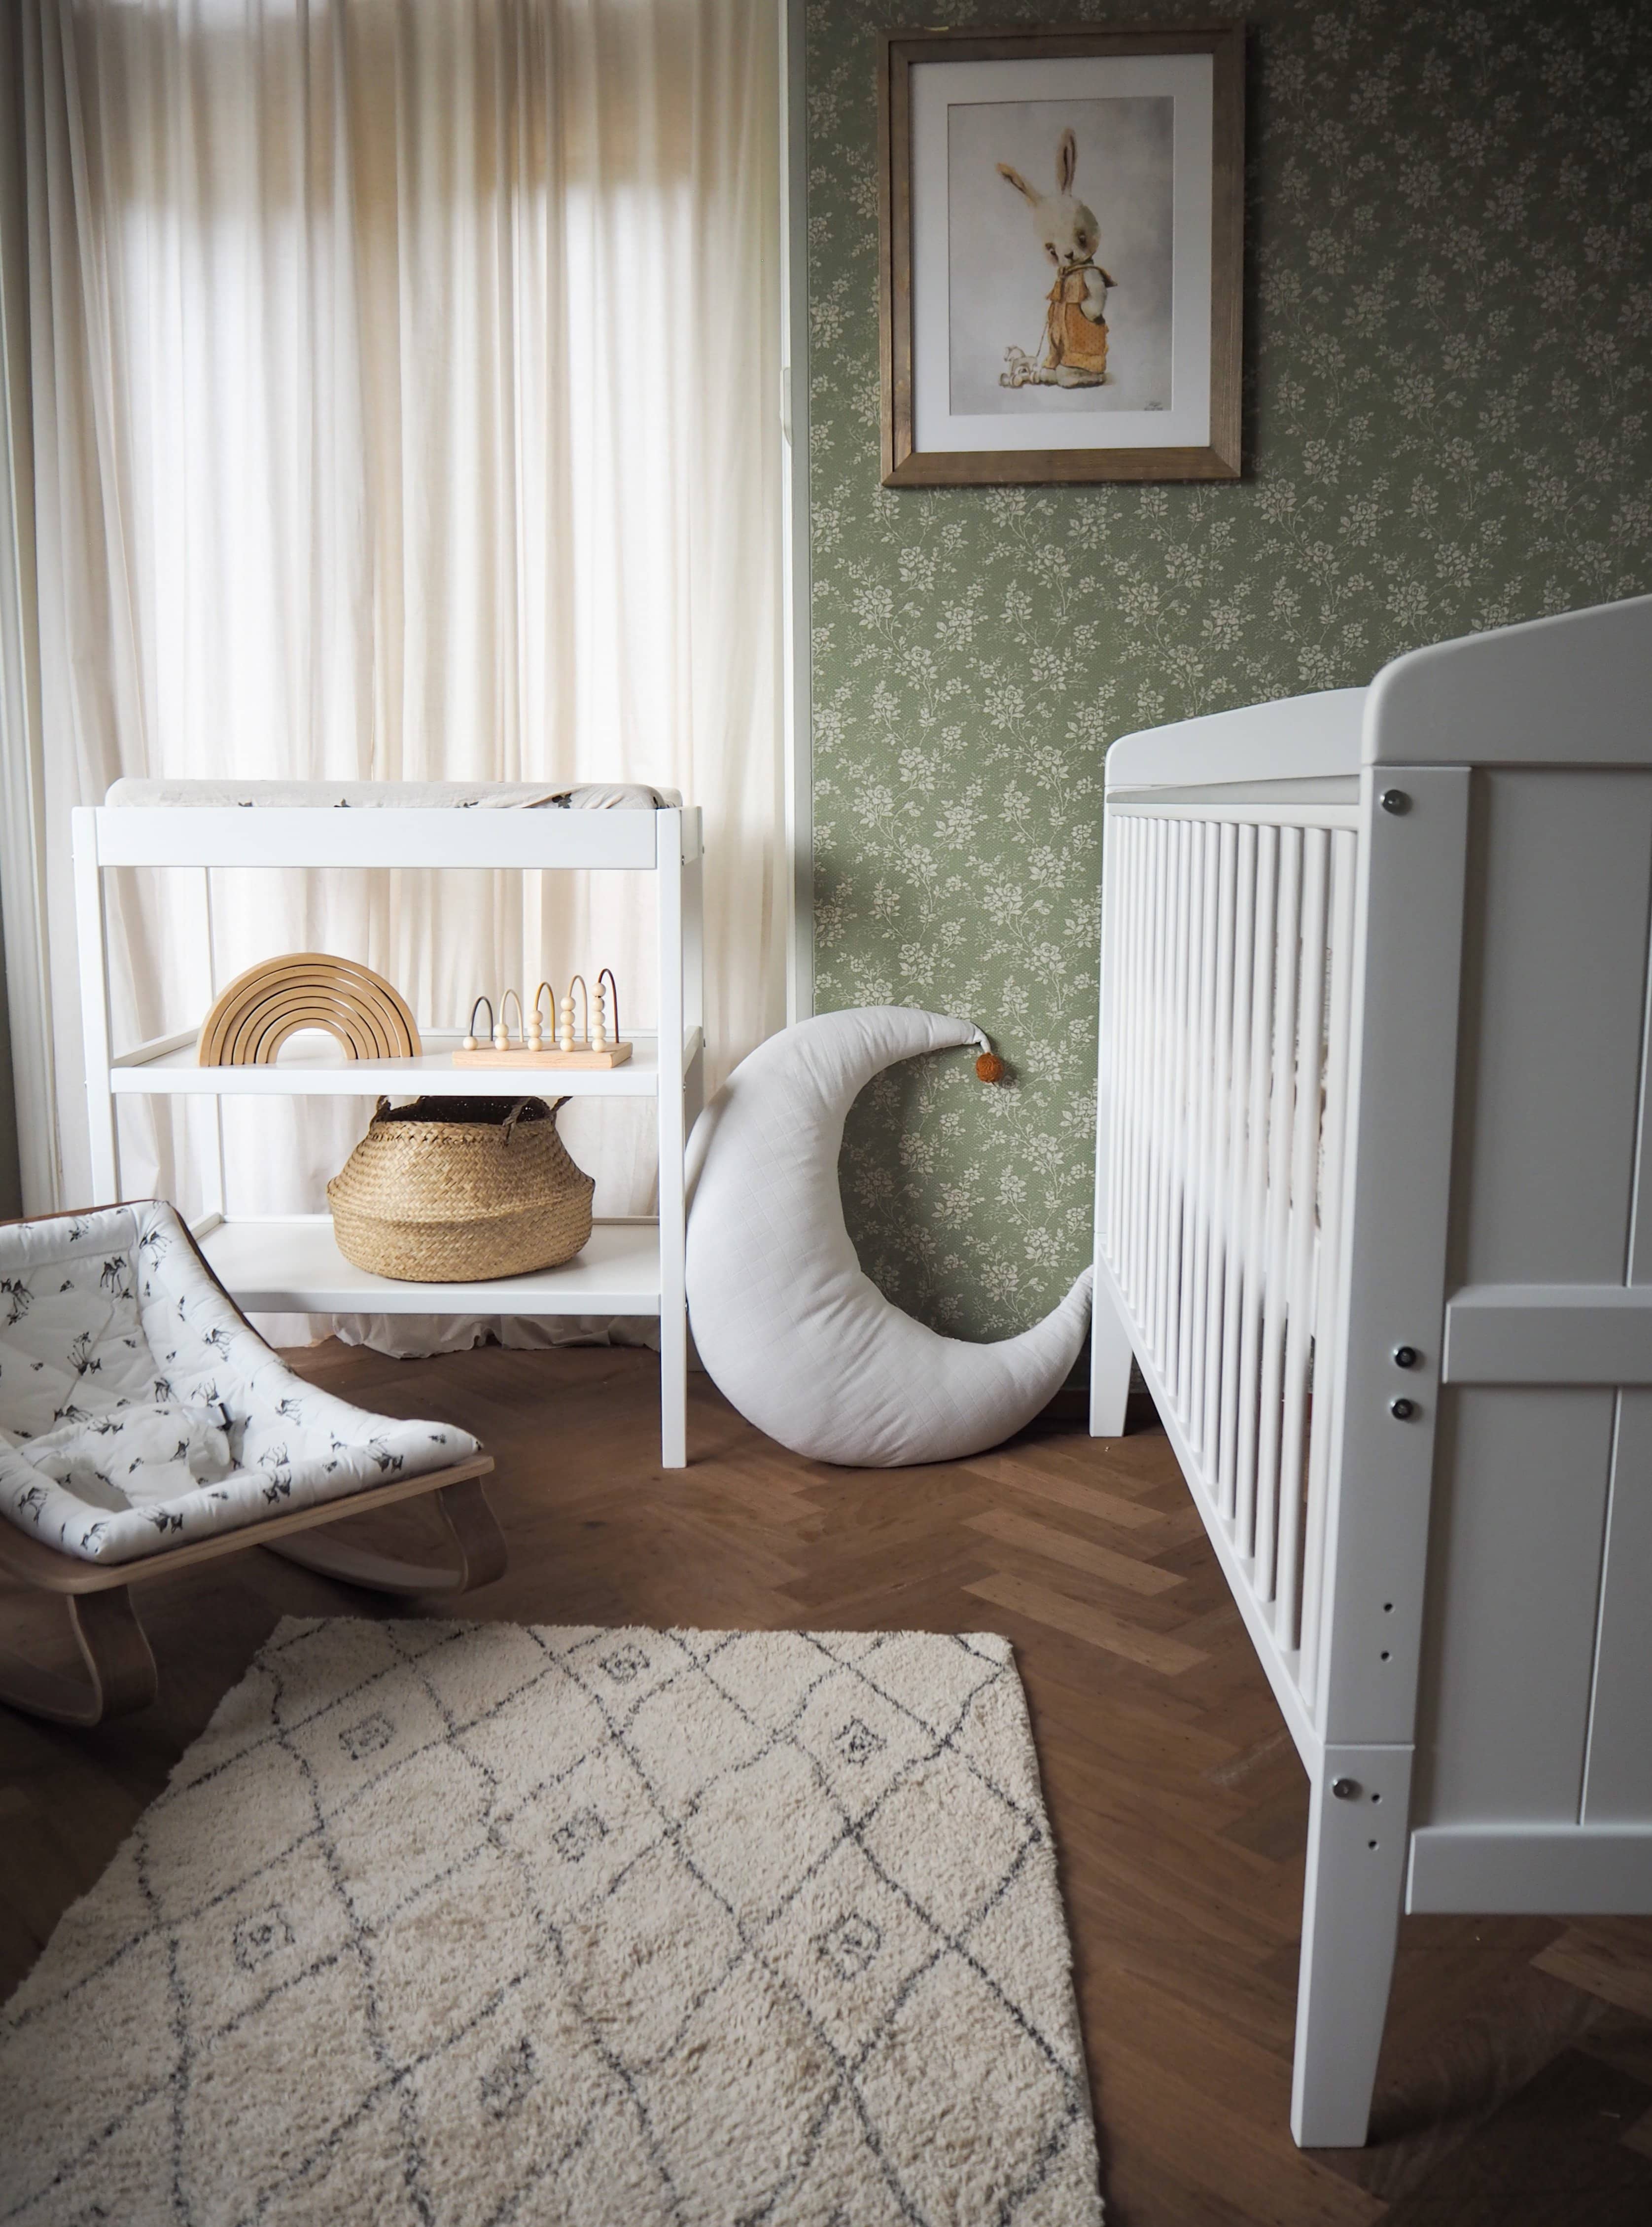 Woodies **Bundle offer** Woodies Noble White 2 in 1 Cot Bed + Mattress + Day Bed Side (140cm)  - Hola BB